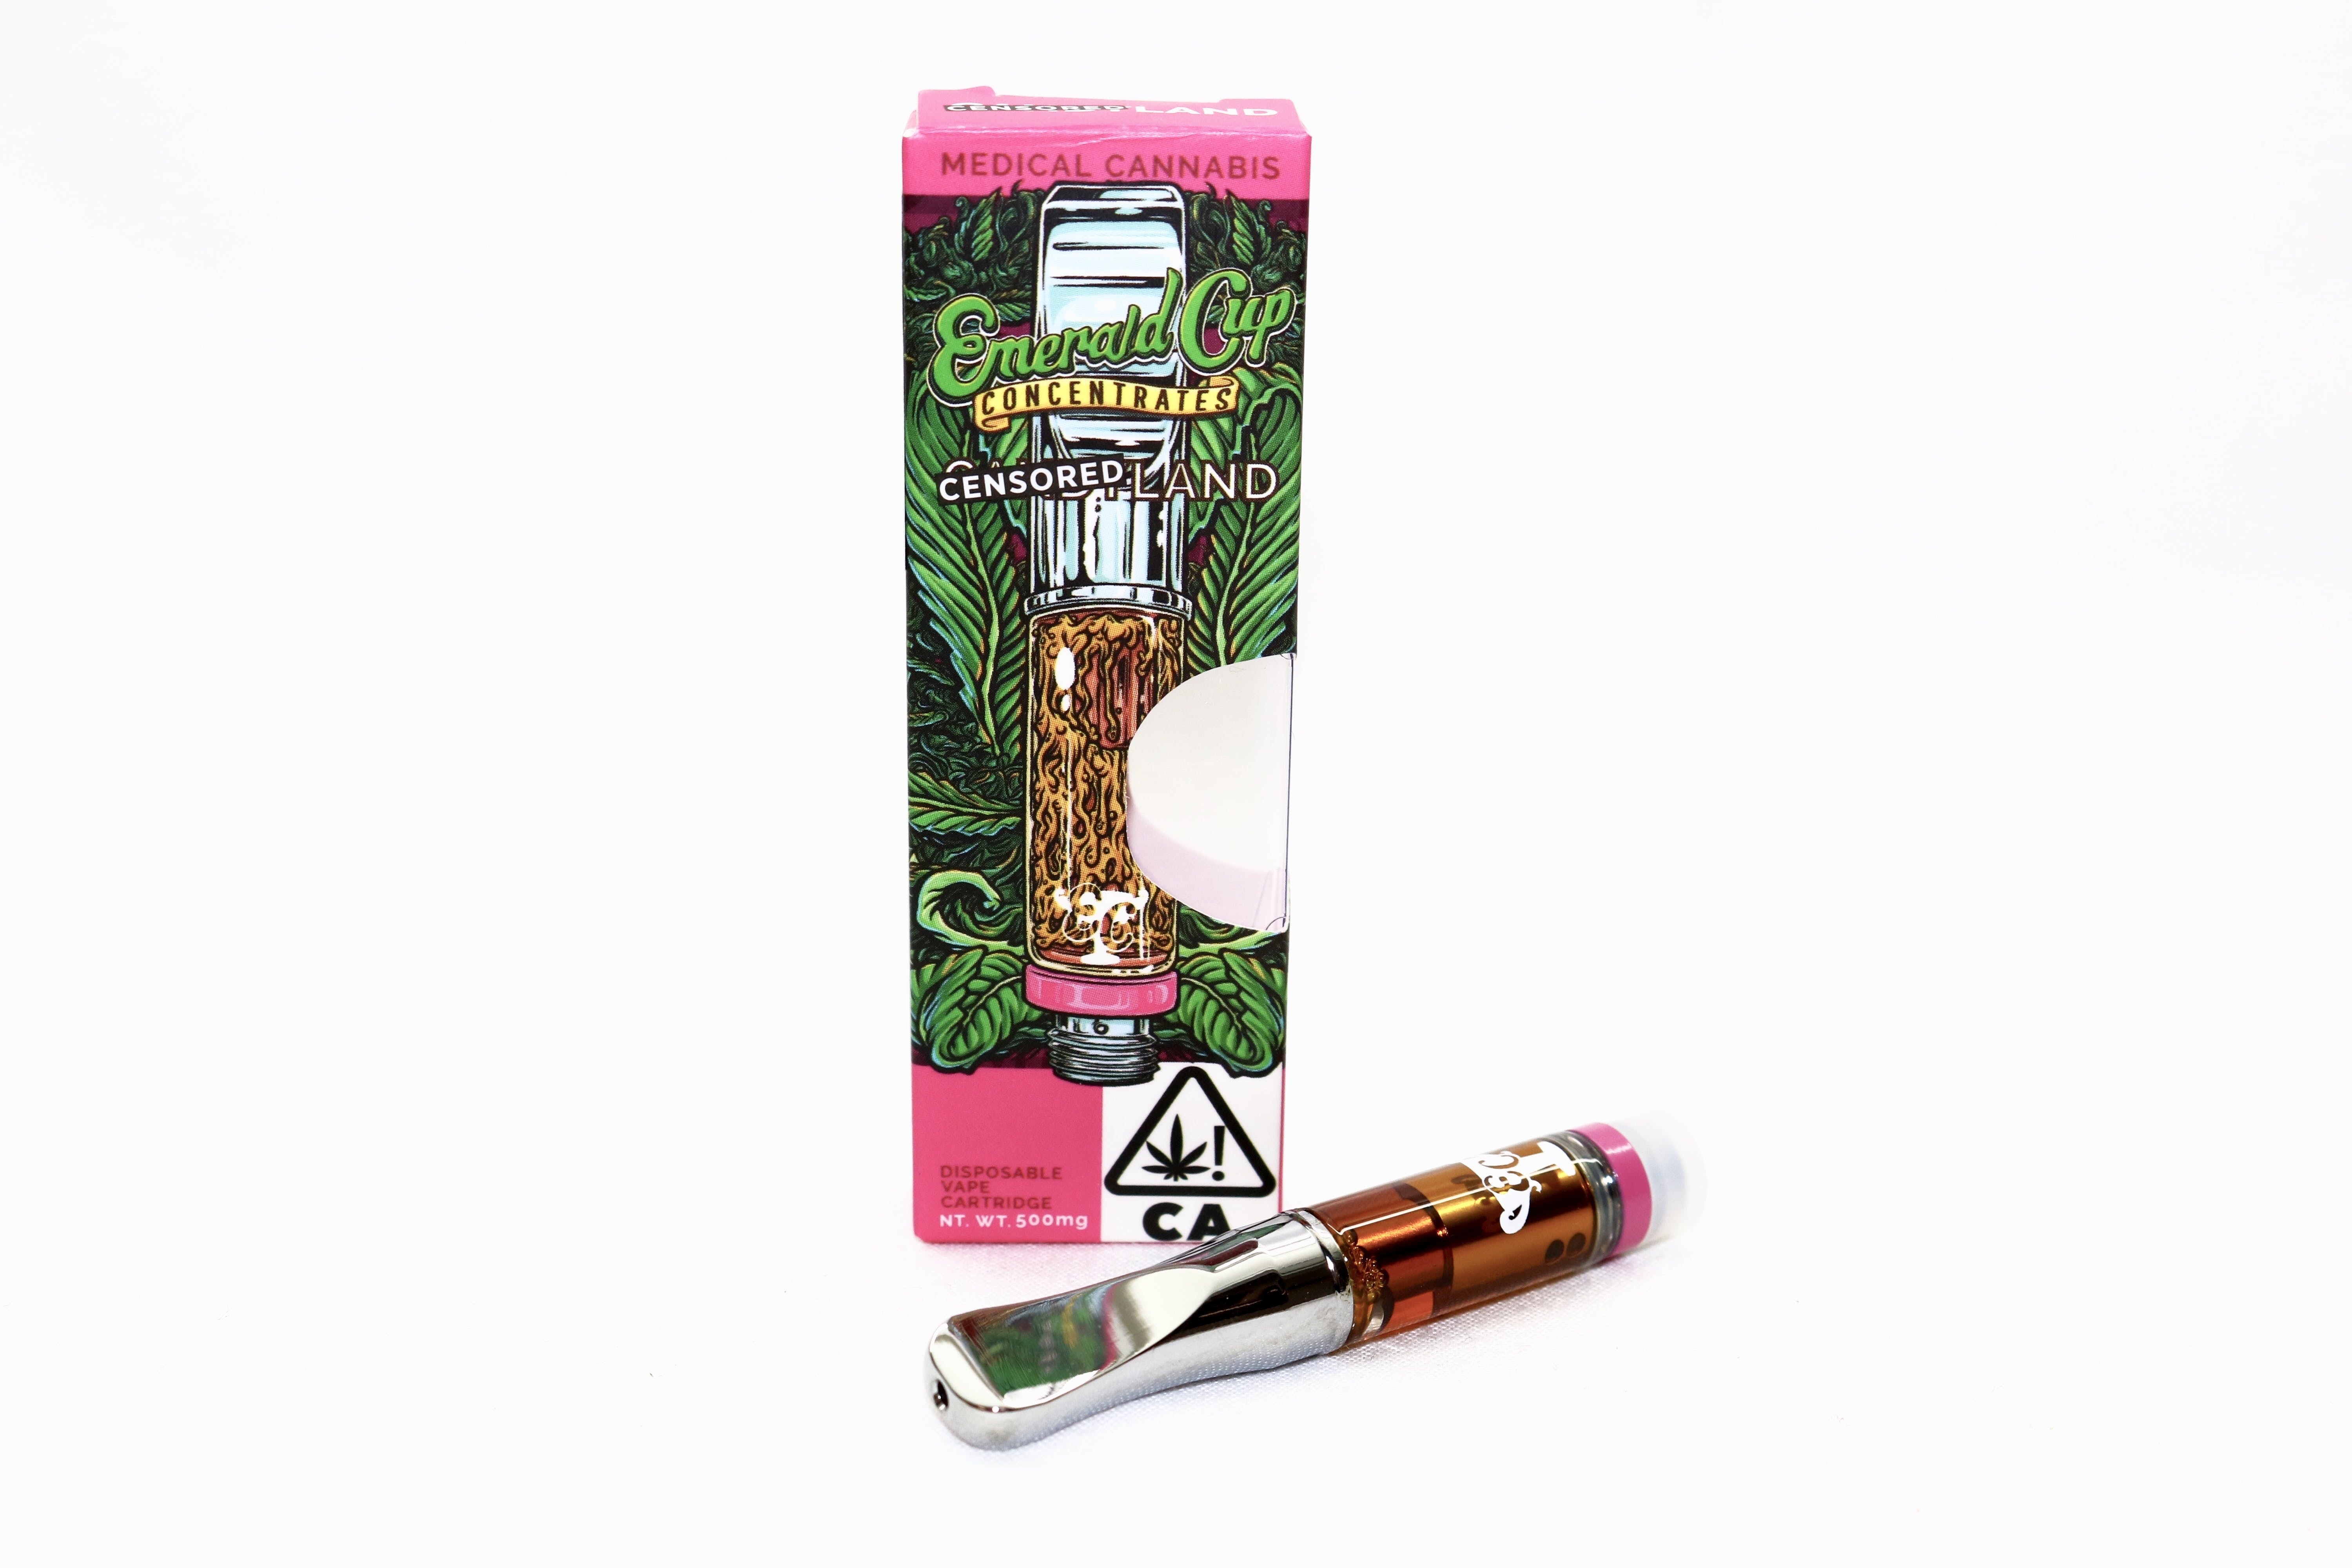 concentrate-absolutextracts-abx-censoredland-vape-cartridge-500mg